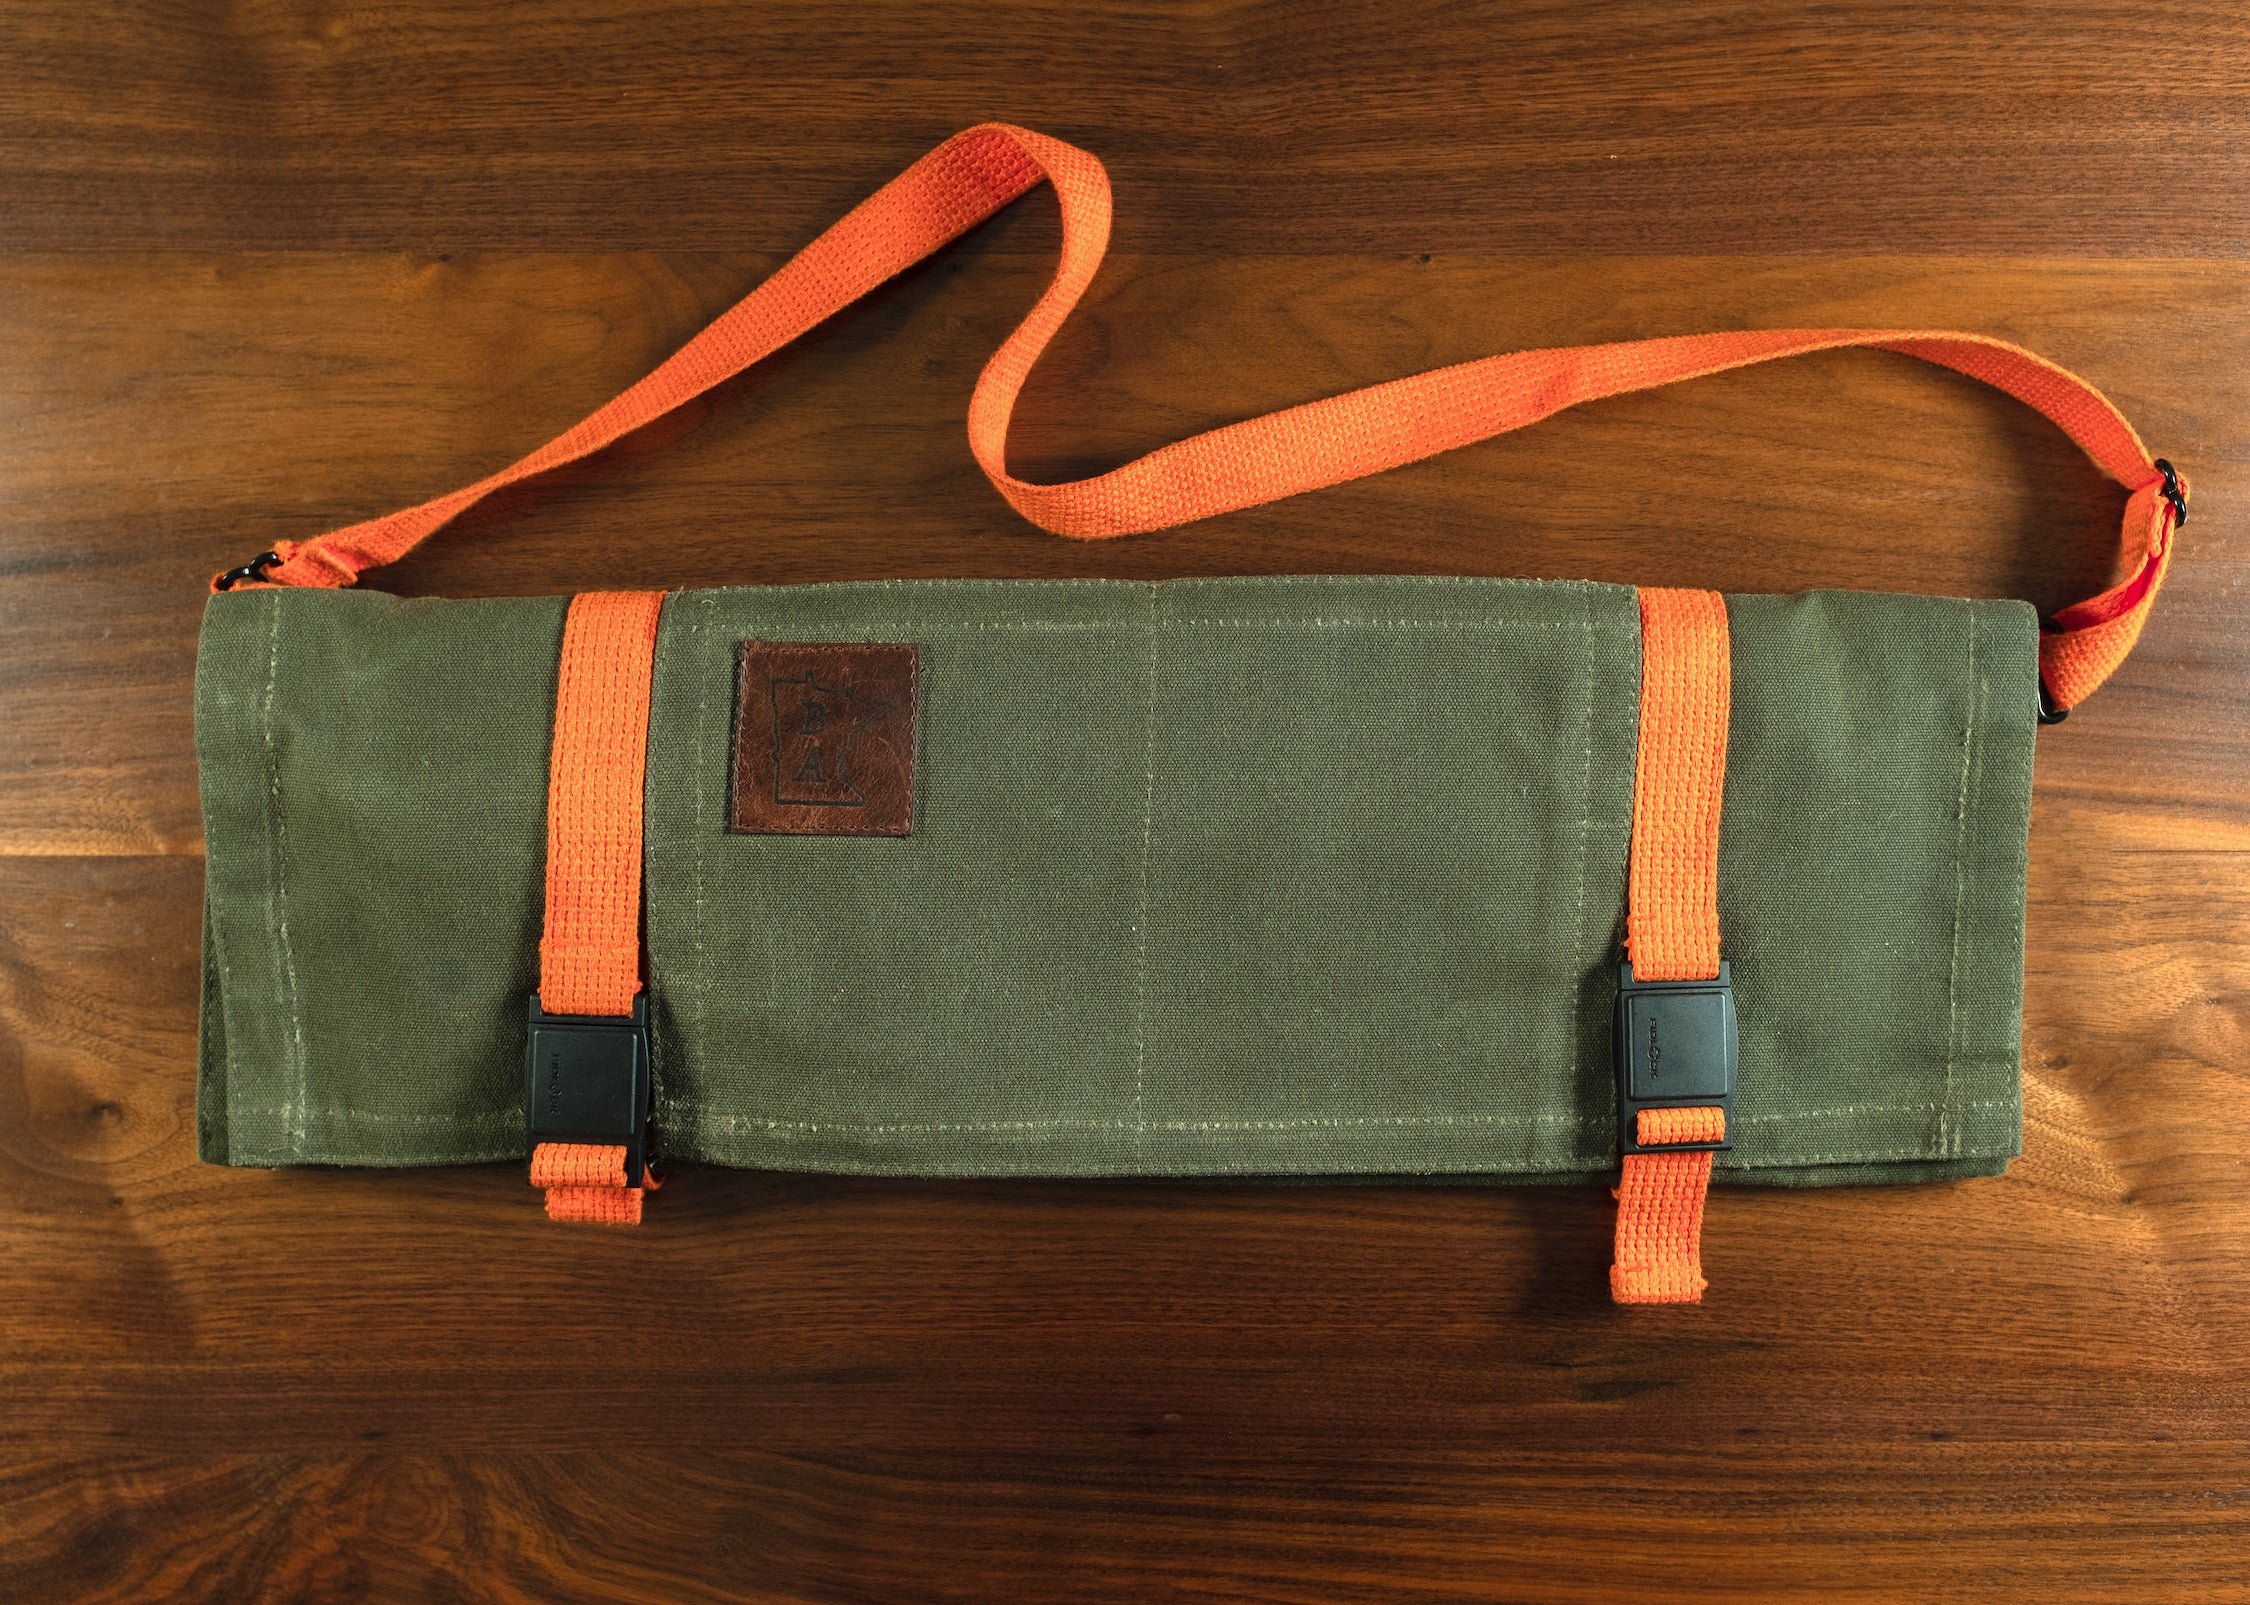 Cotton olive green knife roll protected by tex-wax with orange strapping displayed on a wooden surface. The Main Squeeze knife roll was manufactured in Minnesota by Craftmade Aprons.